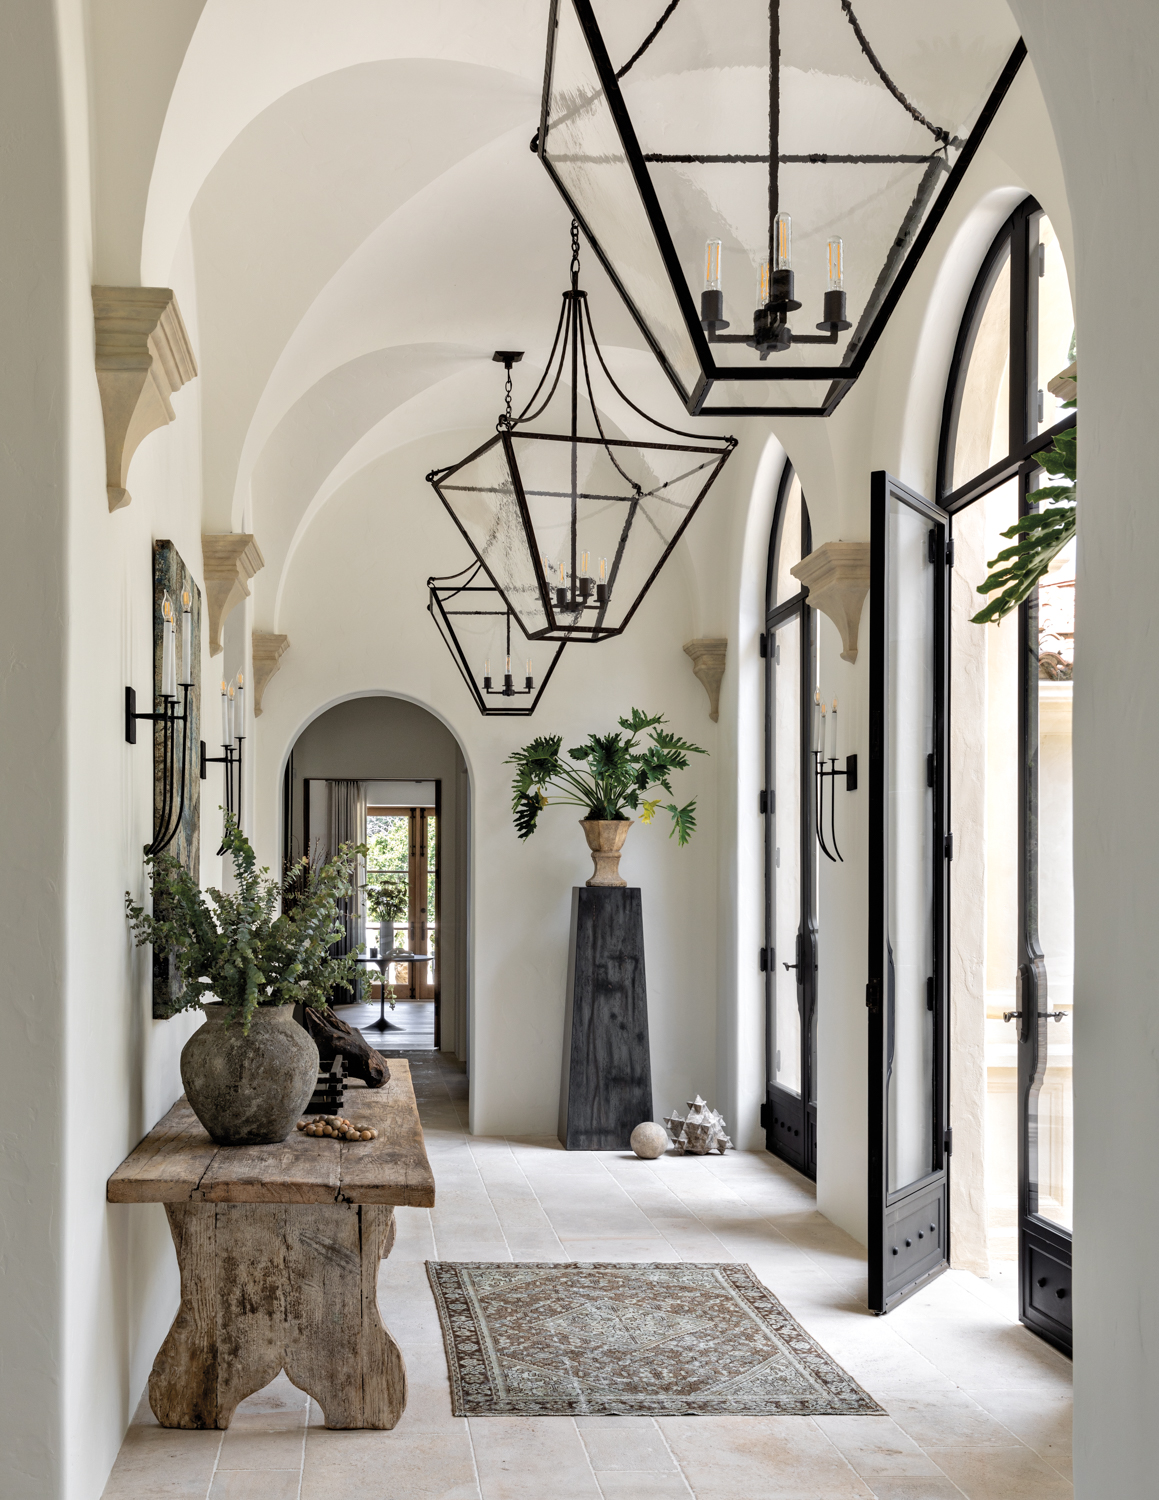 Entrance hall with arched doorways,...